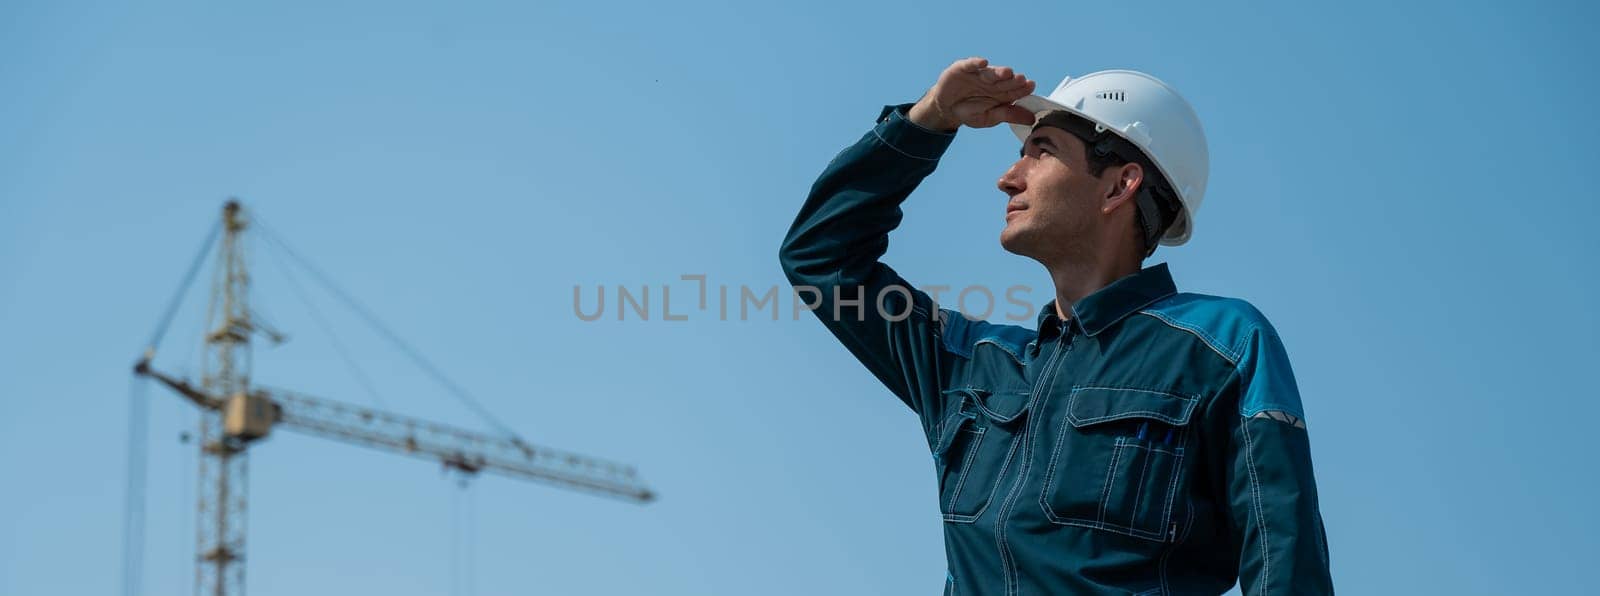 A builder in work clothes and a helmet stands on a construction site against the background of a construction crane